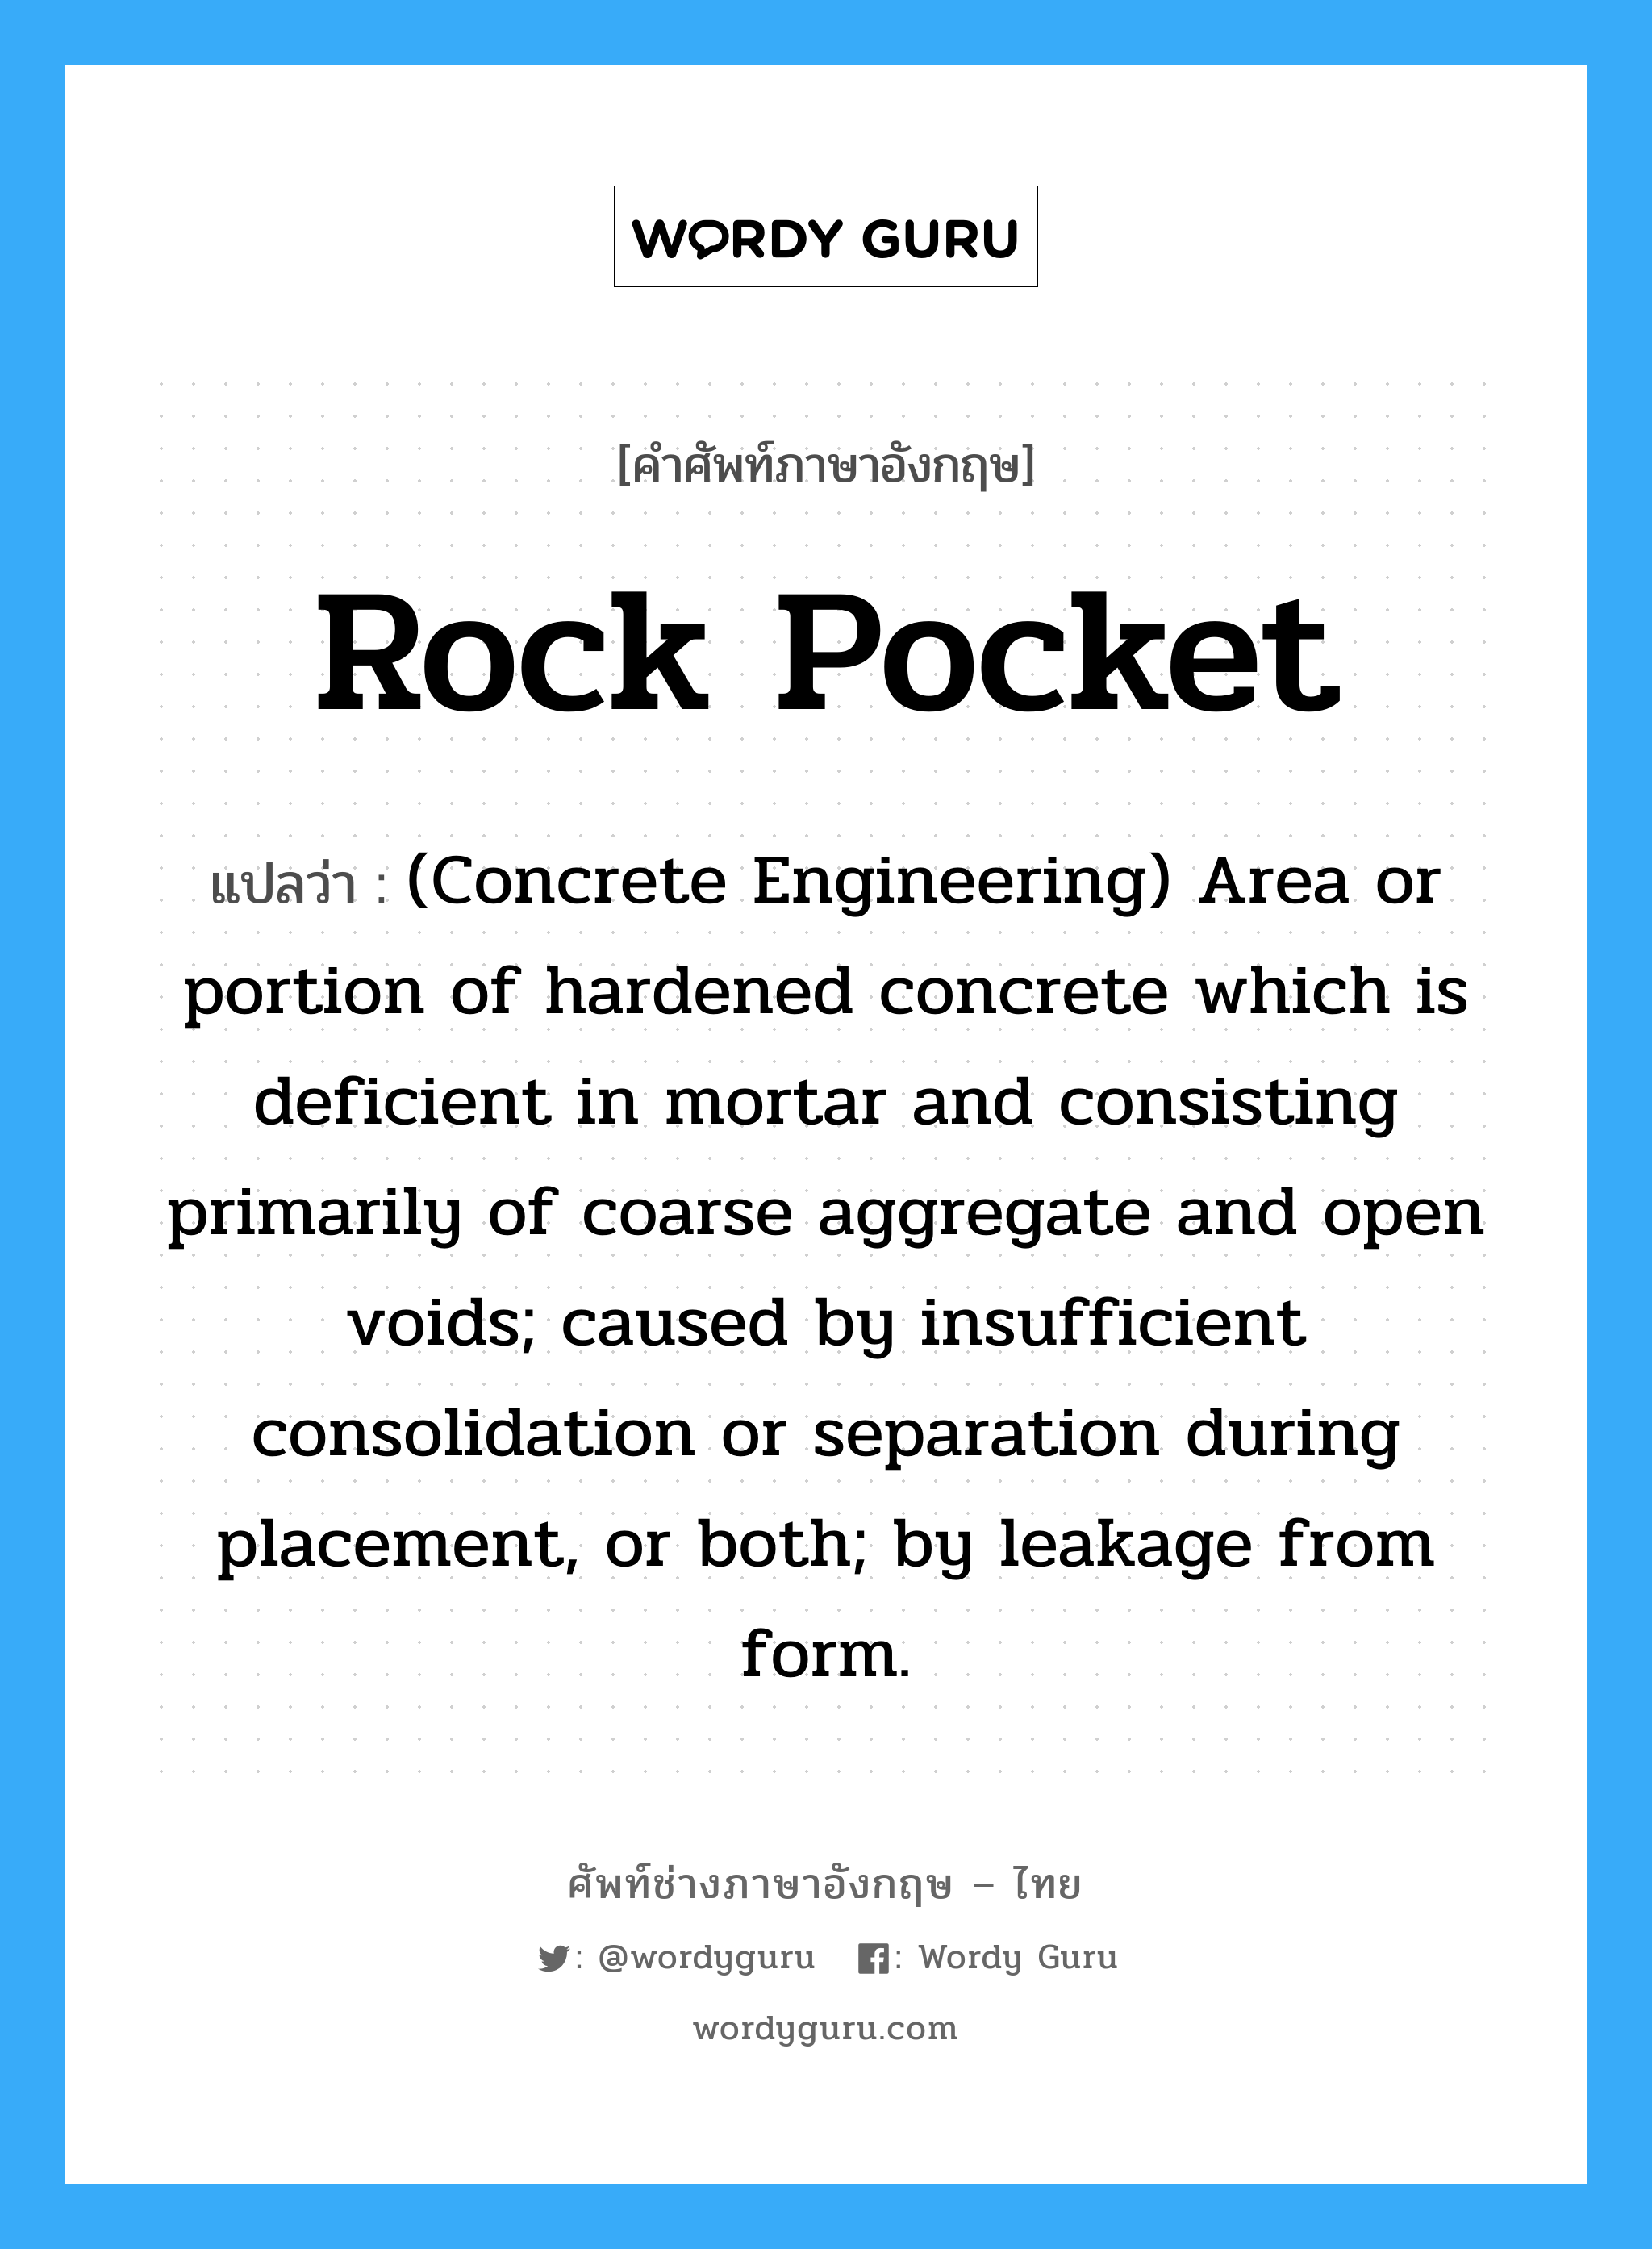 Rock Pocket แปลว่า?, คำศัพท์ช่างภาษาอังกฤษ - ไทย Rock Pocket คำศัพท์ภาษาอังกฤษ Rock Pocket แปลว่า (Concrete Engineering) Area or portion of hardened concrete which is deficient in mortar and consisting primarily of coarse aggregate and open voids; caused by insufficient consolidation or separation during placement, or both; by leakage from form.